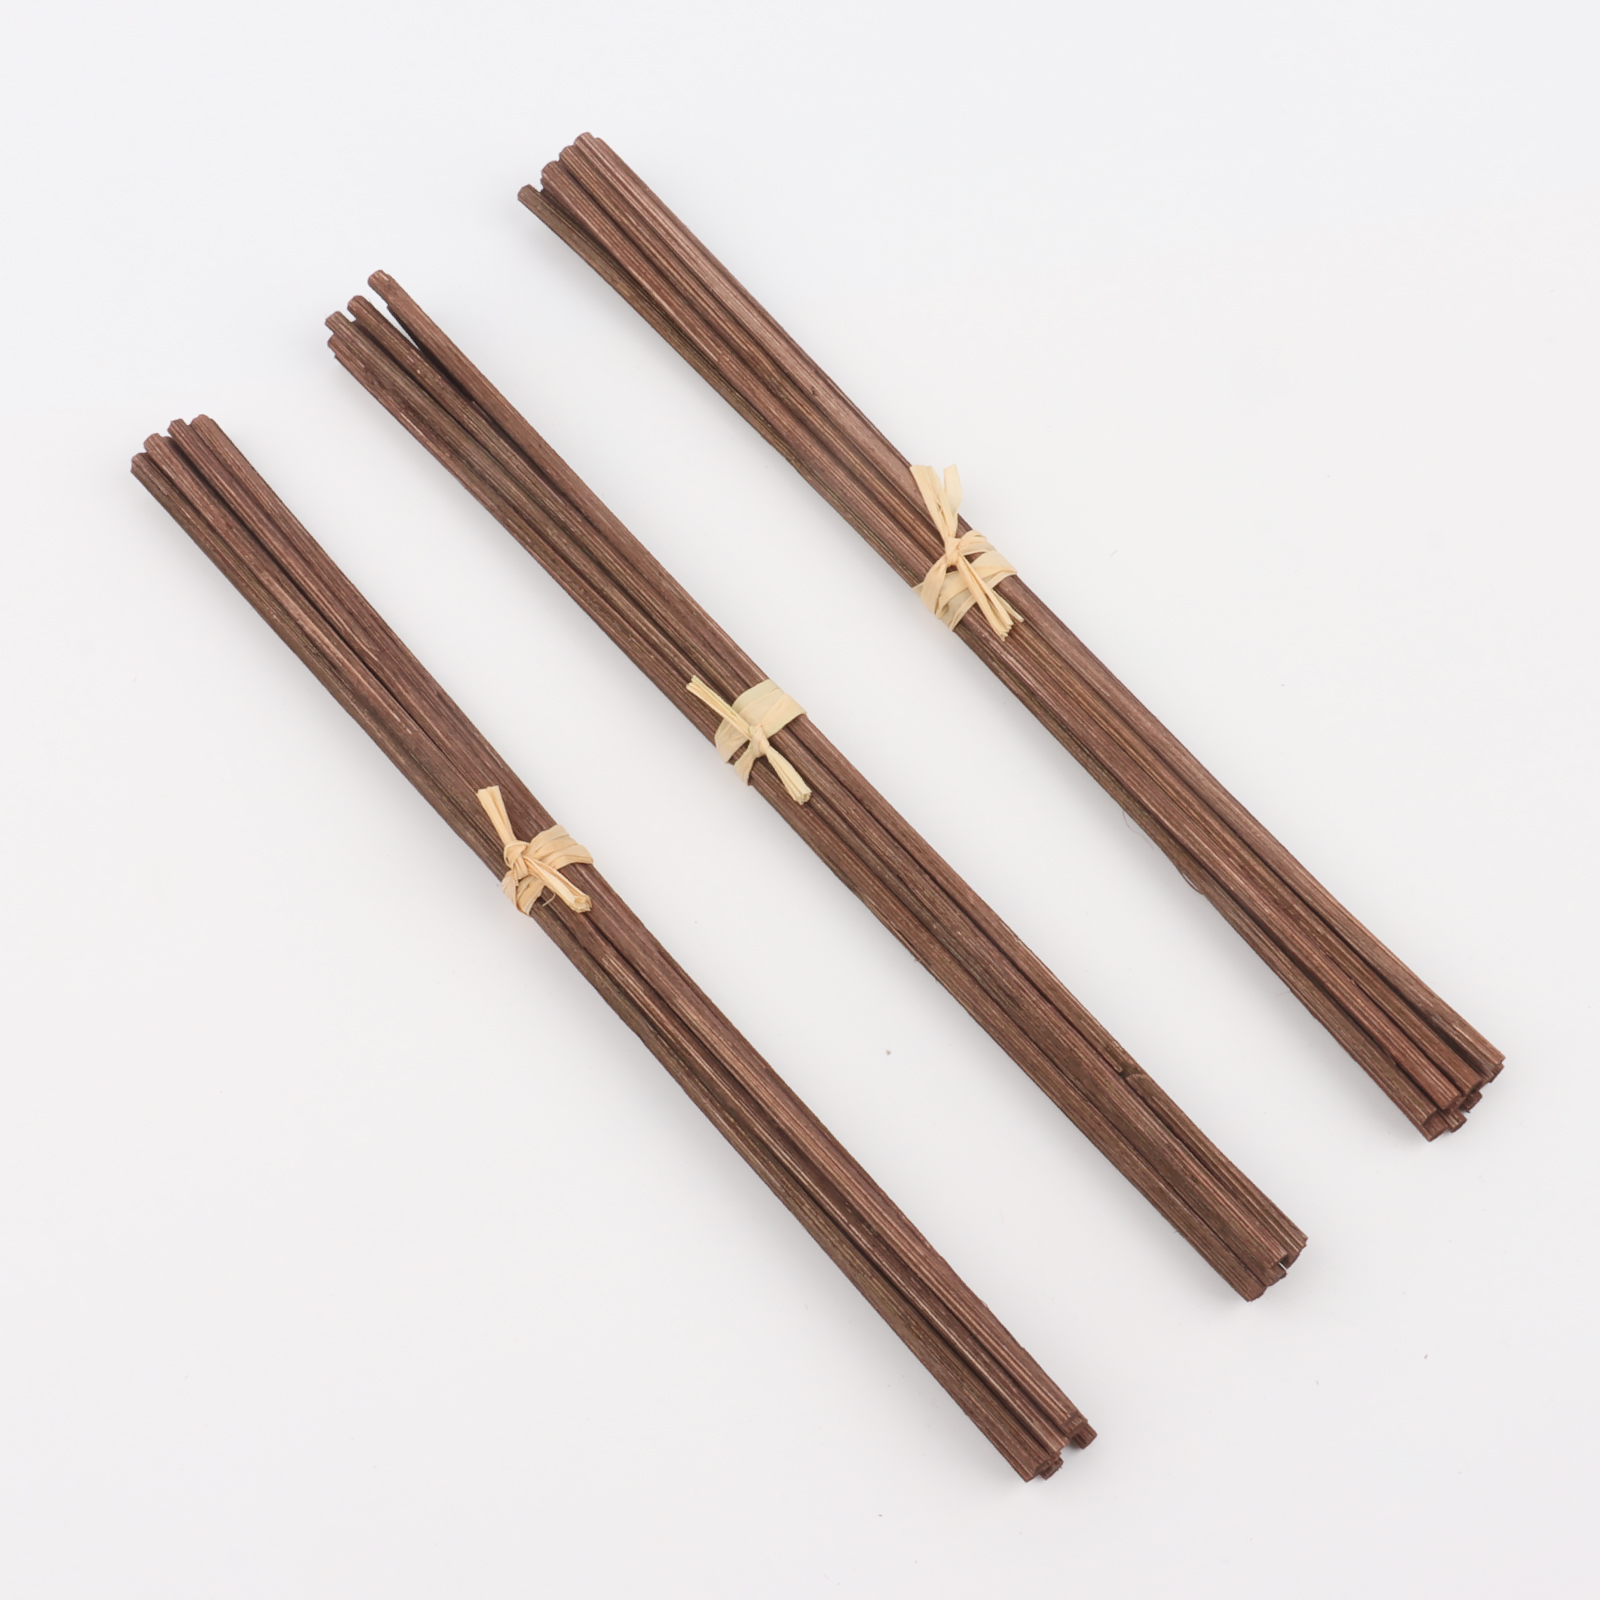 Essential Oil Aroma Replacement Wood Reed Diffuser Sticks Brown Natural Rattan Sticks